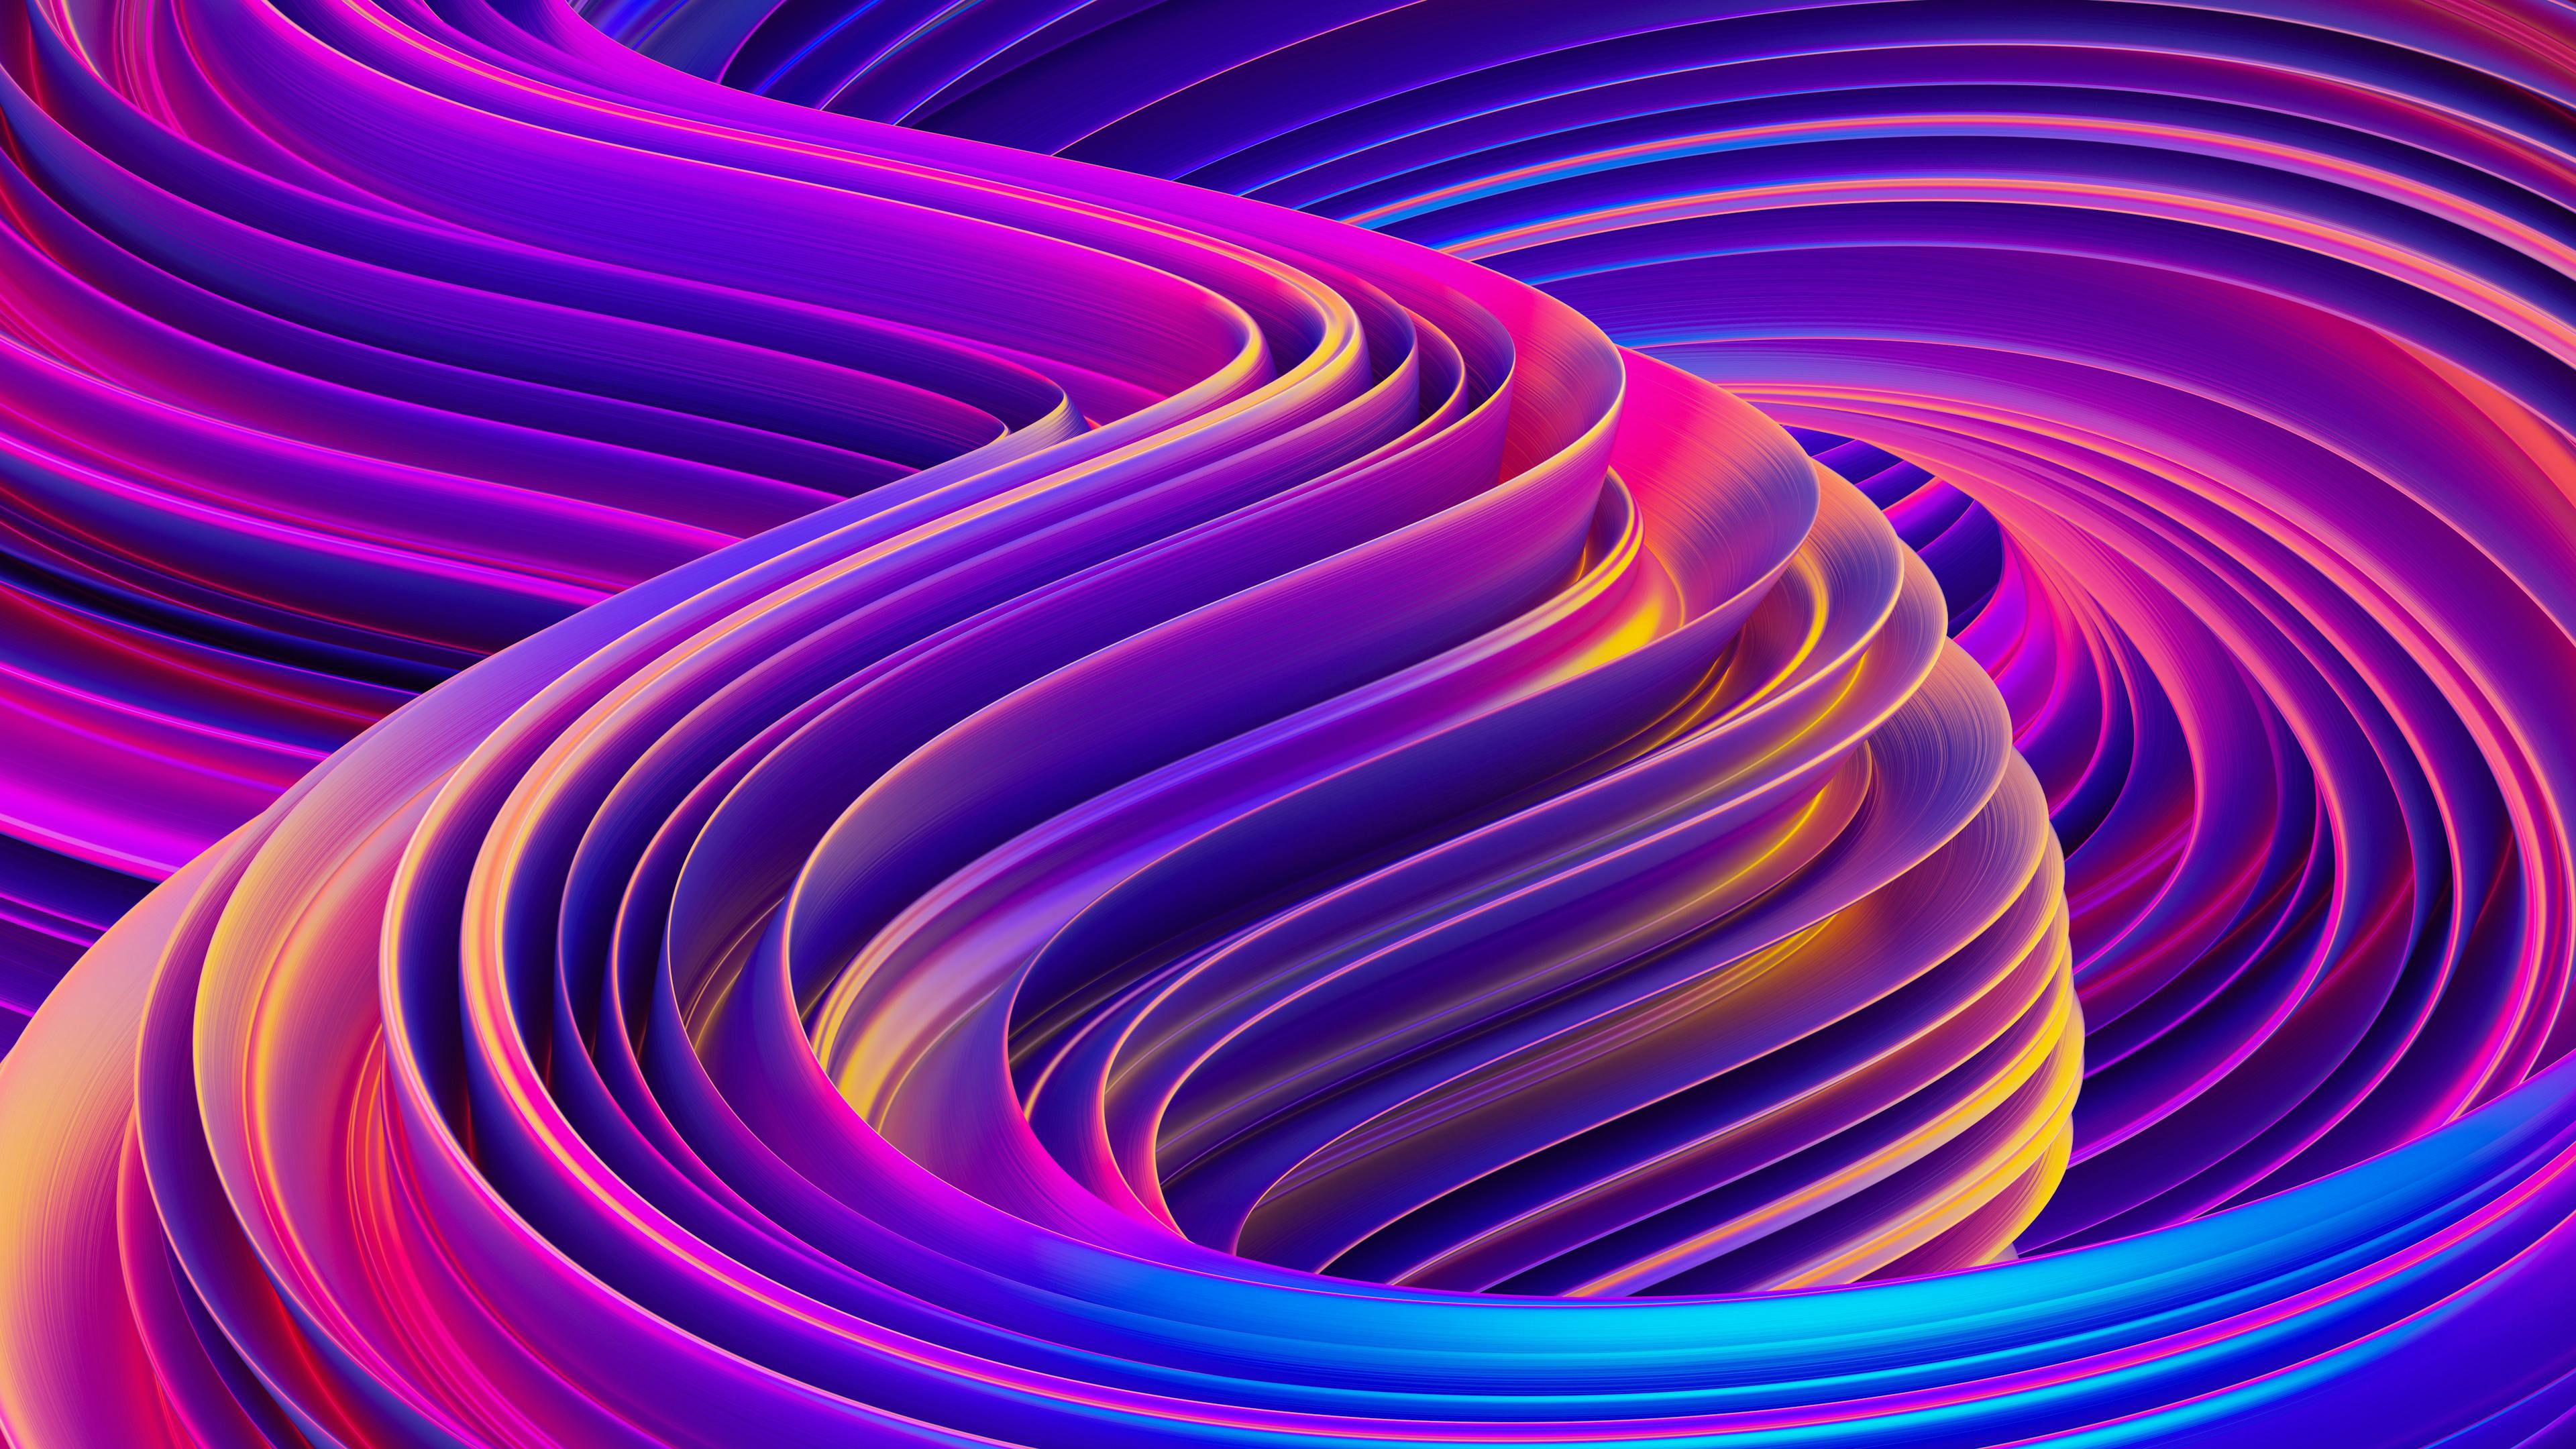 Liquid shapes abstract holographic 3D wavy background | Image Credit: © alexey_boldin - stock.adobe.com.